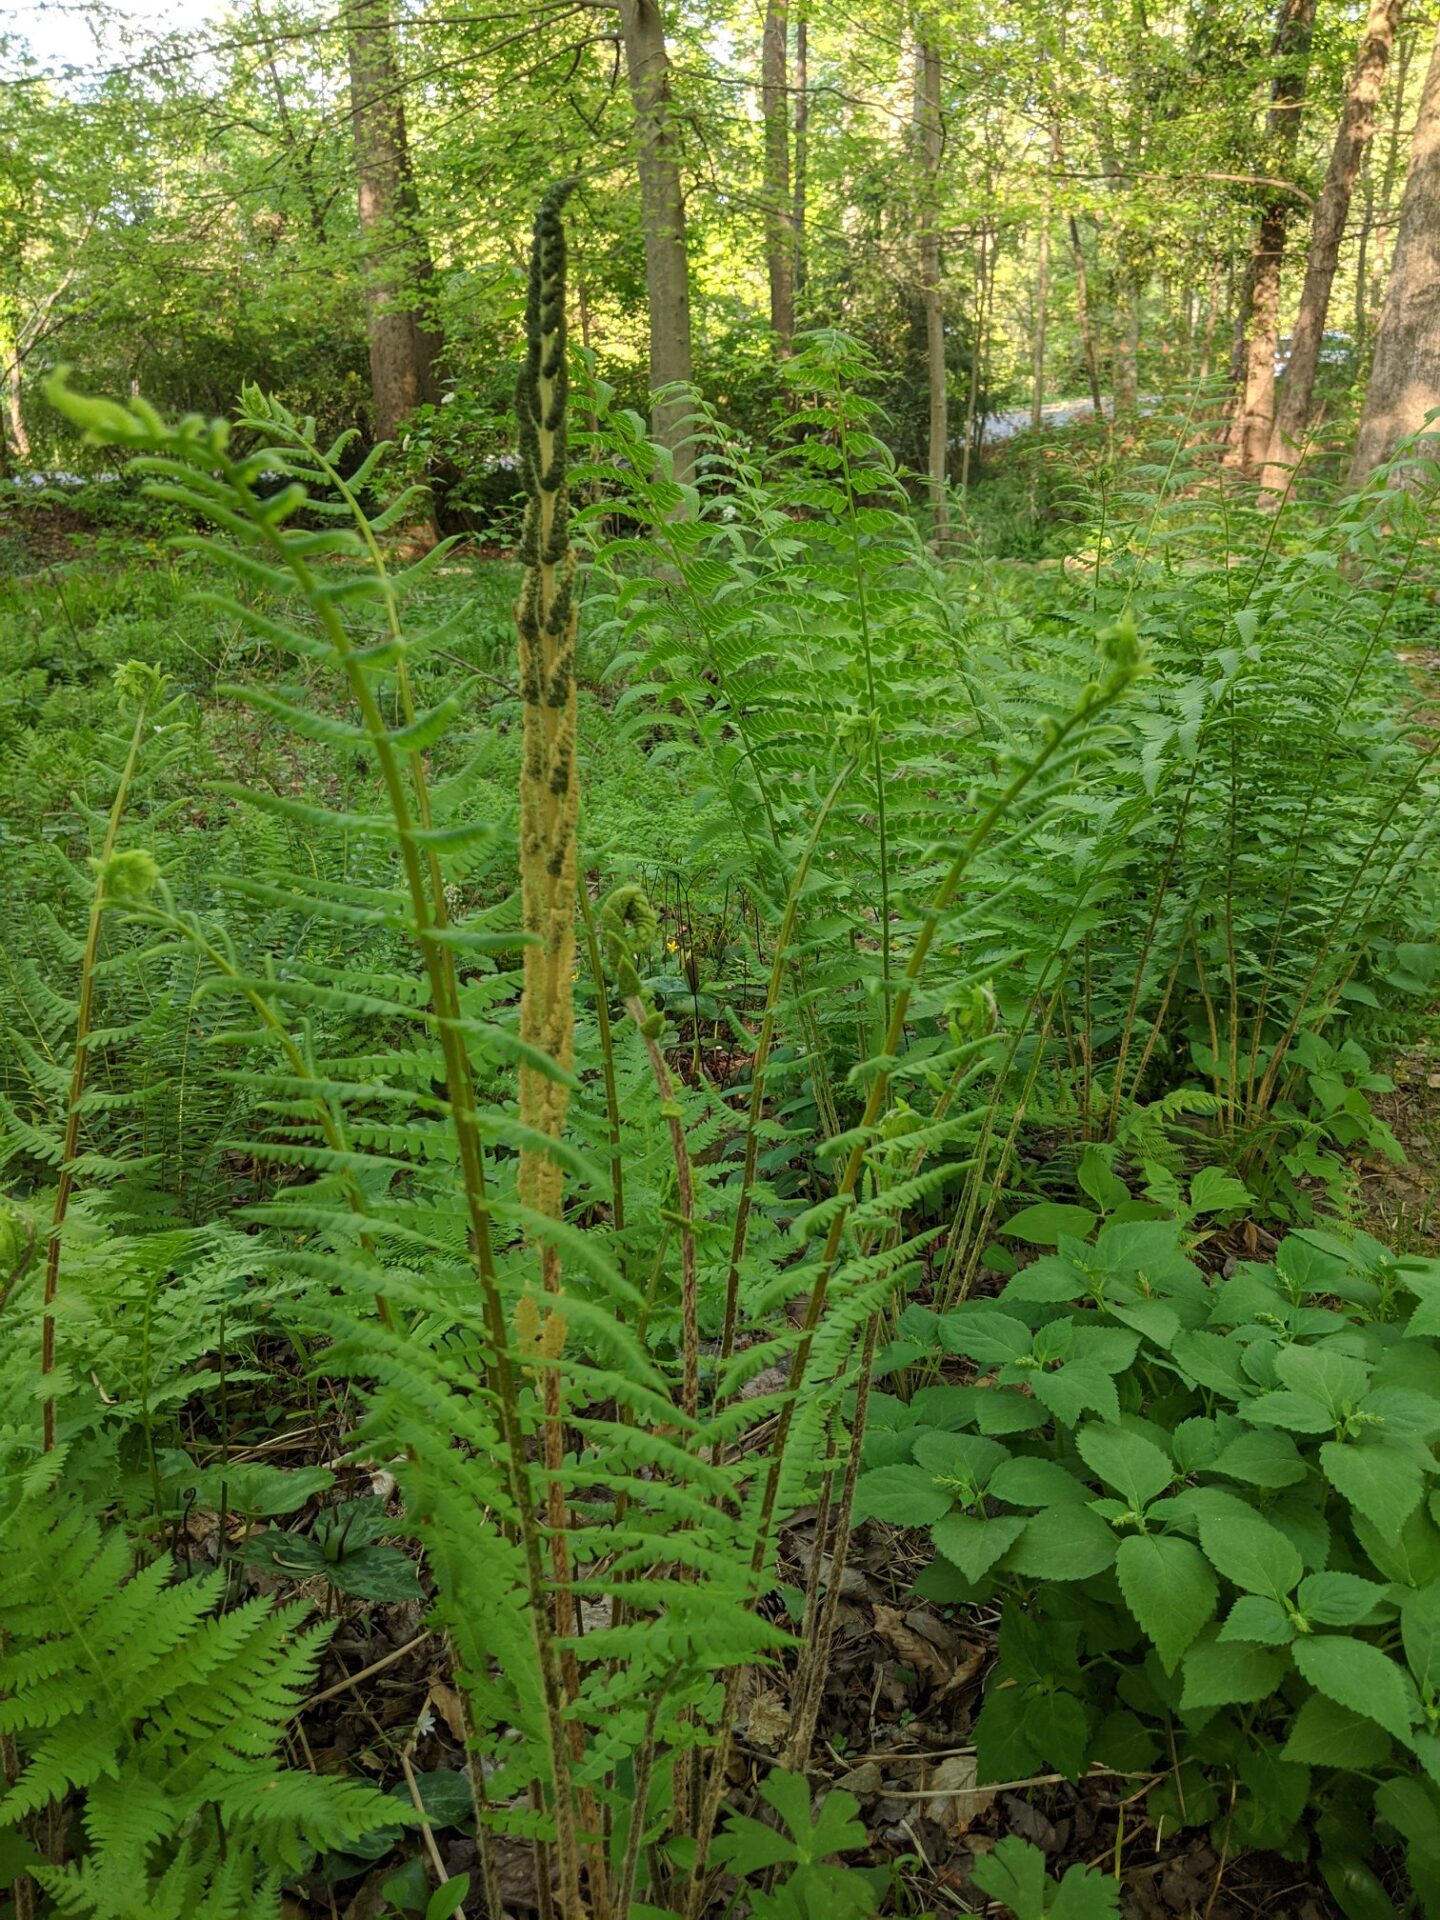 Dryopteris ferns, probably Southern Wood Fern (D. ludoviciana) or LogFern (D. celsa)